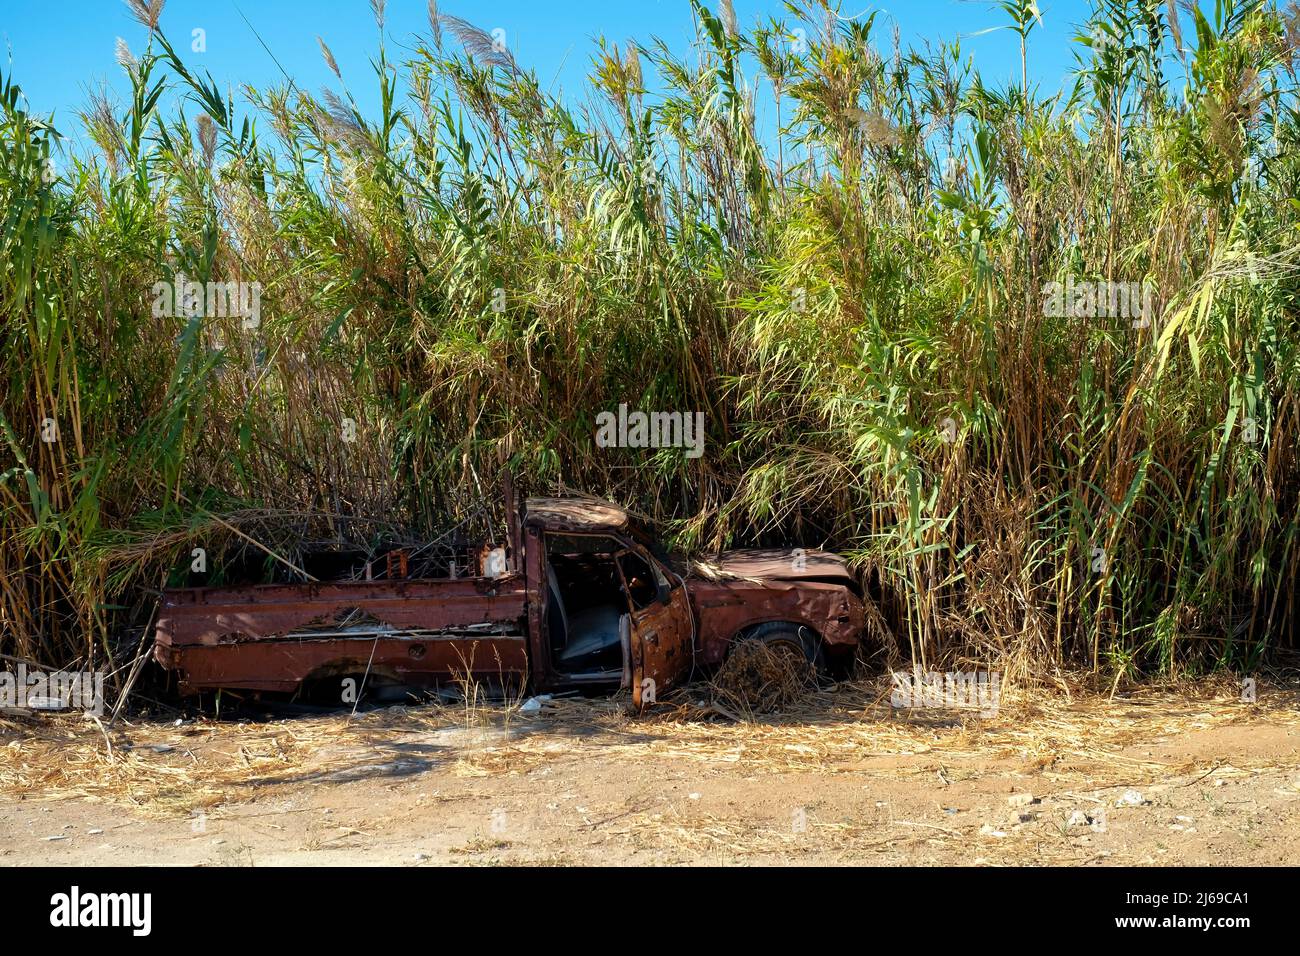 Old pick-up truck abandoned against giant reed Stock Photo